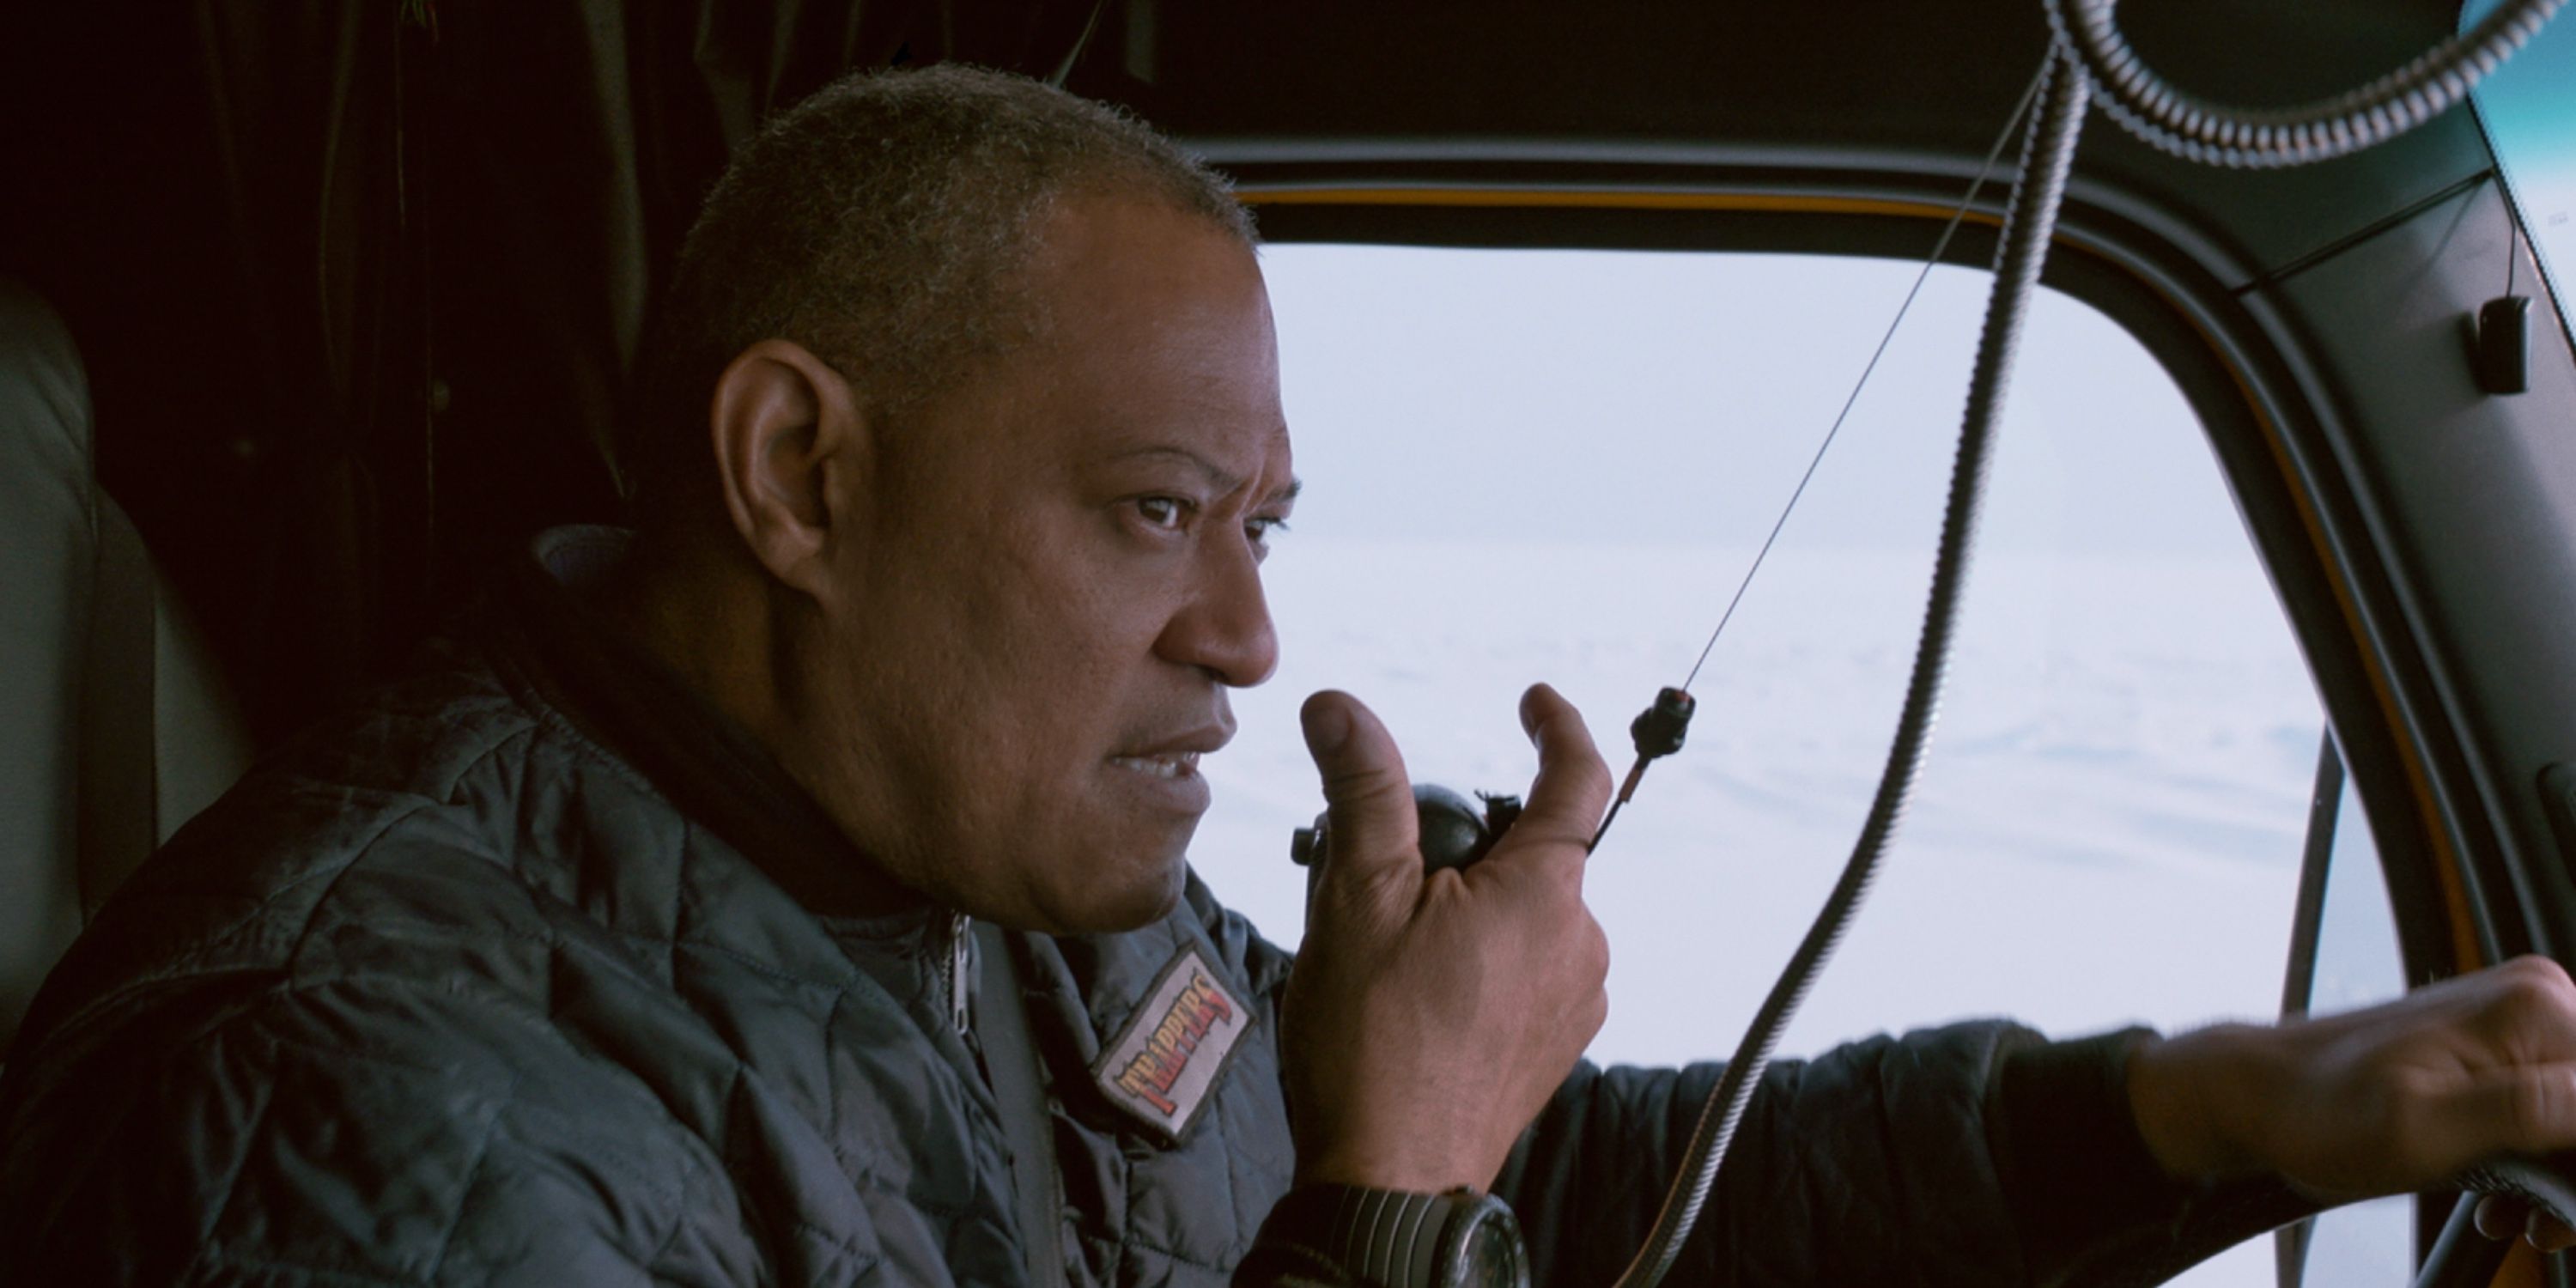 Laurence Fishburne as Goldenrod in The Ice Road on Netflix